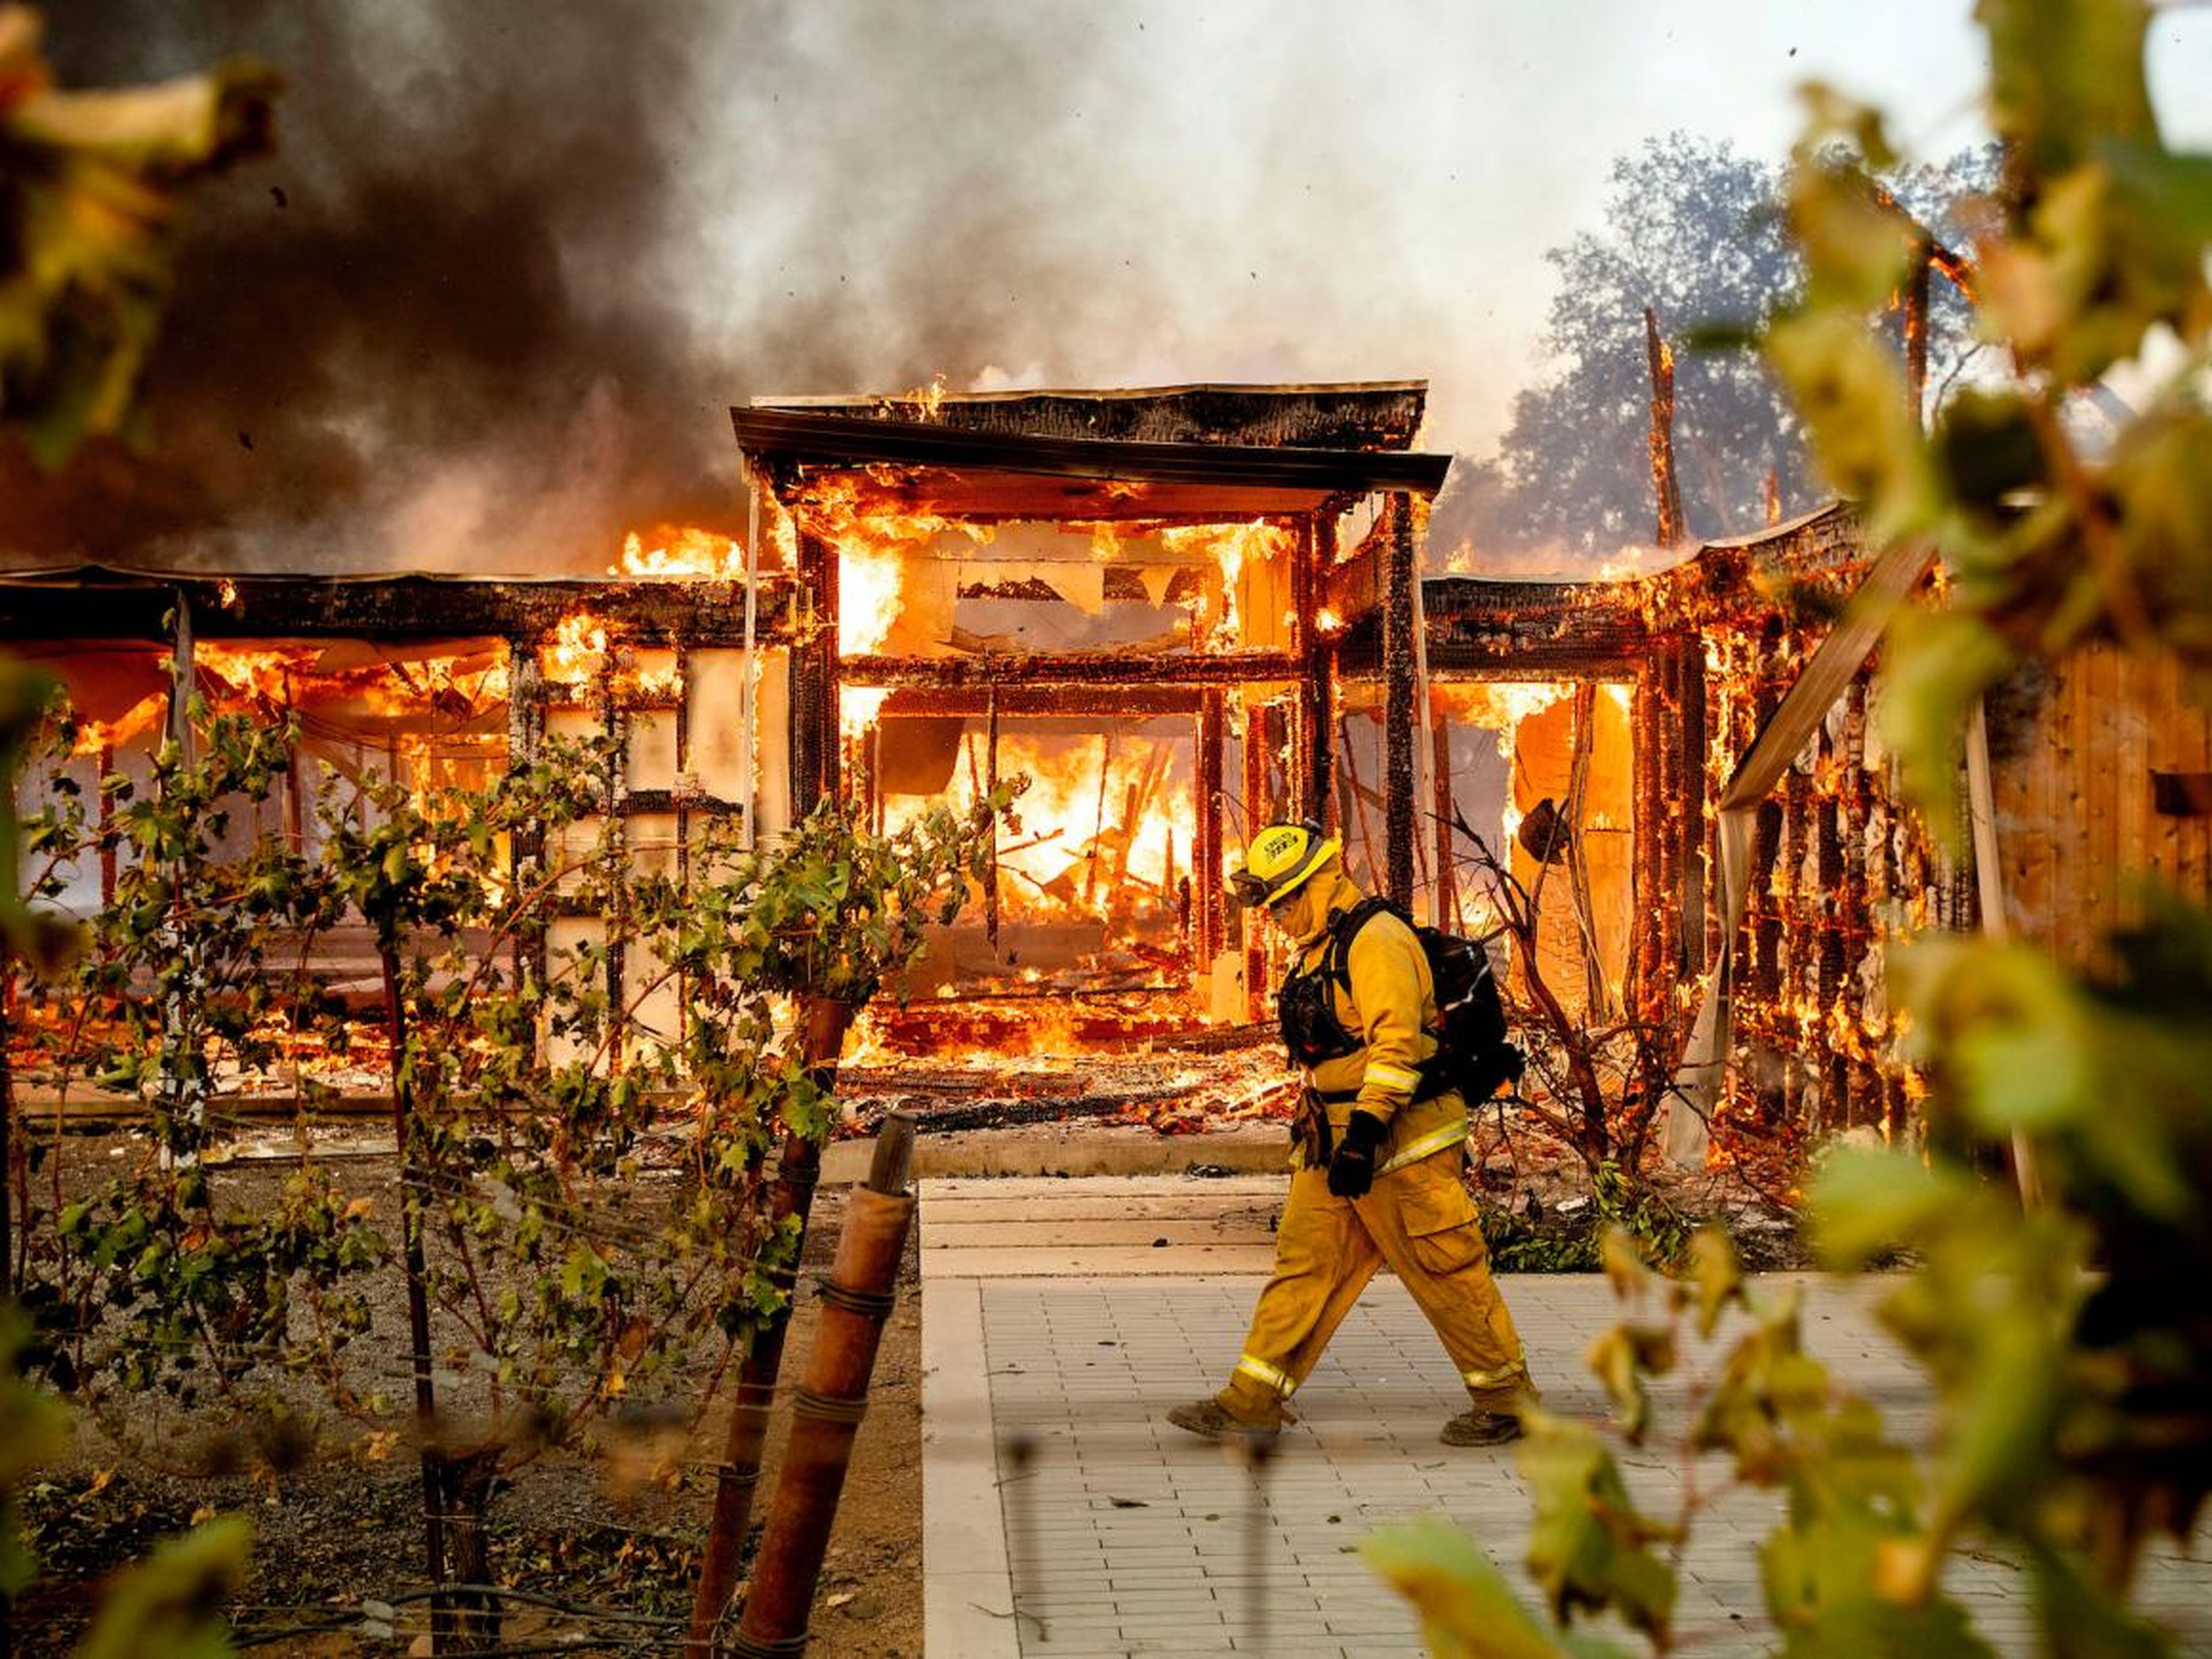 Dry vegetation in hot regions lights up easily, which means more frequent, bigger wildfires.